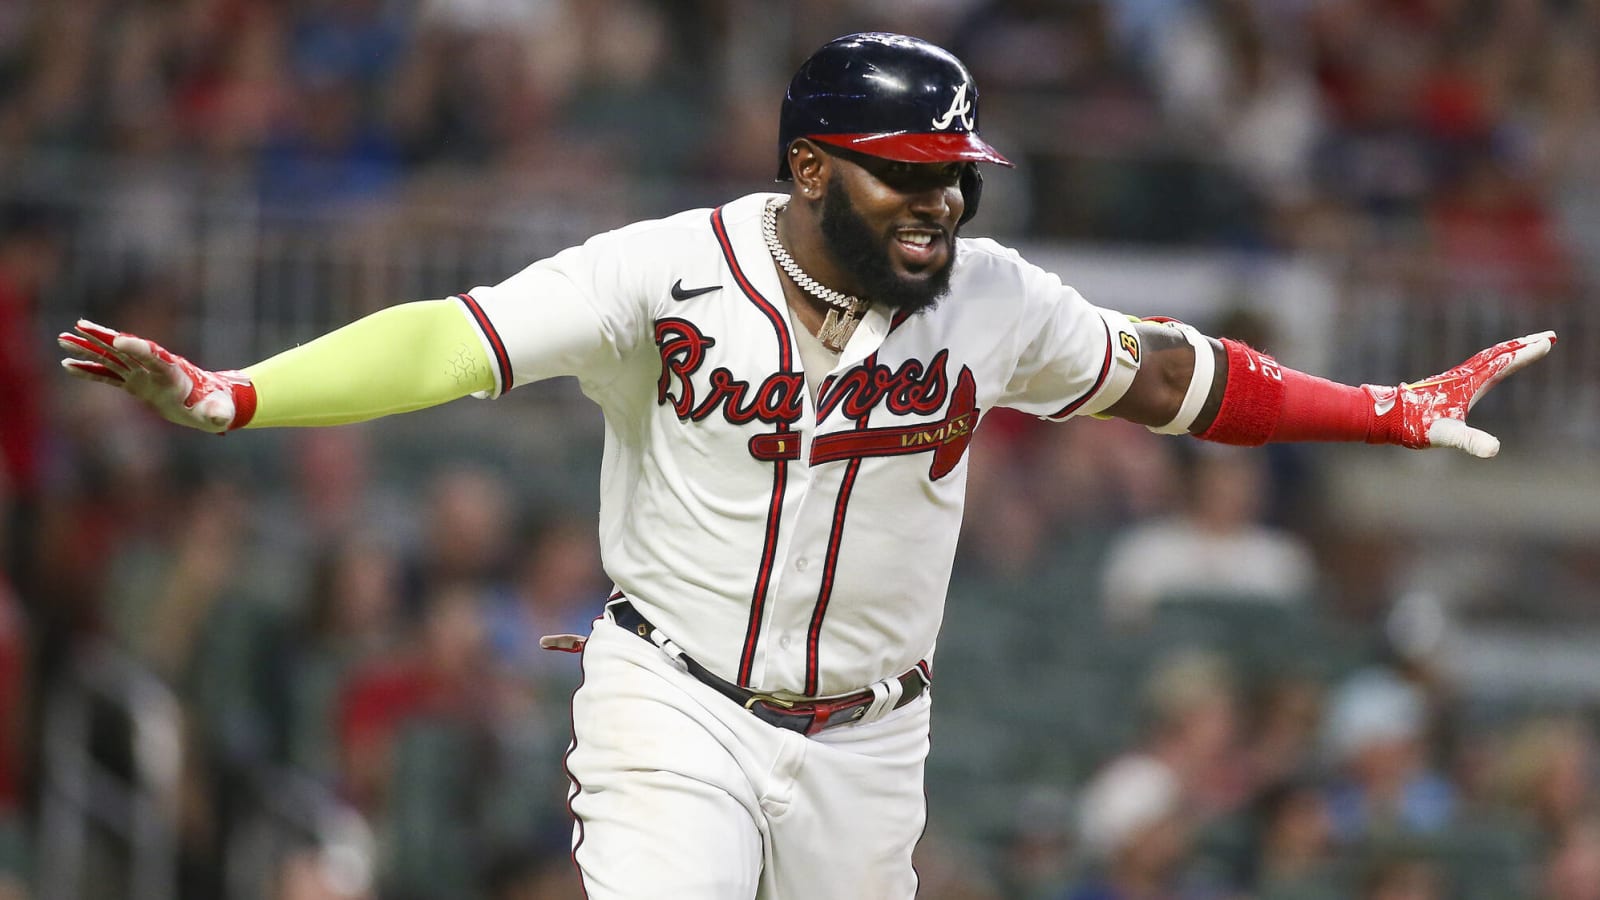 The Braves can’t keep starting Marcell Ozuna